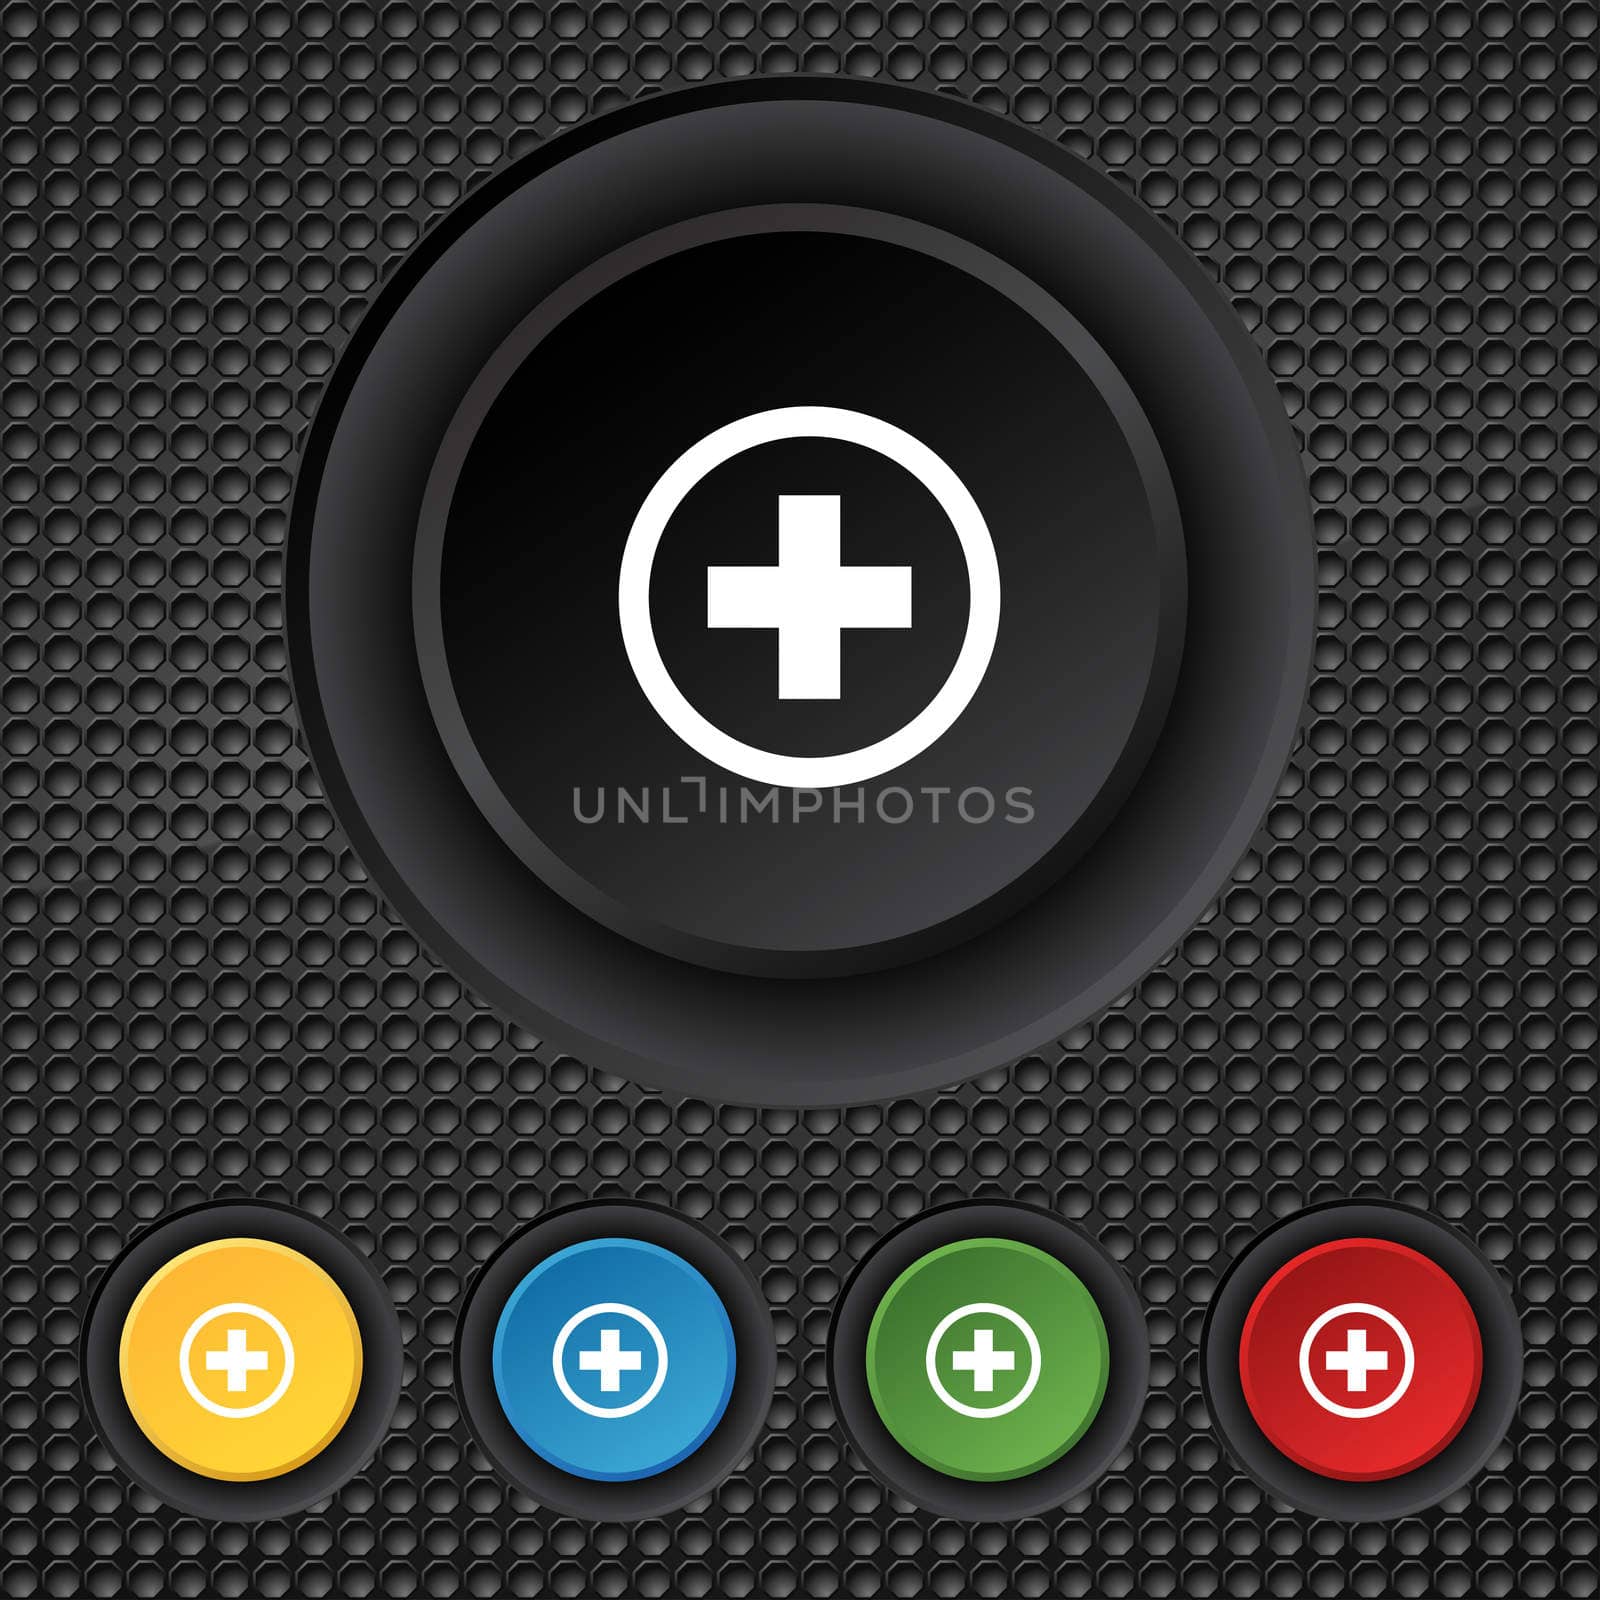 Plus sign icon. Positive symbol. Zoom in.Set colourful buttons illustration